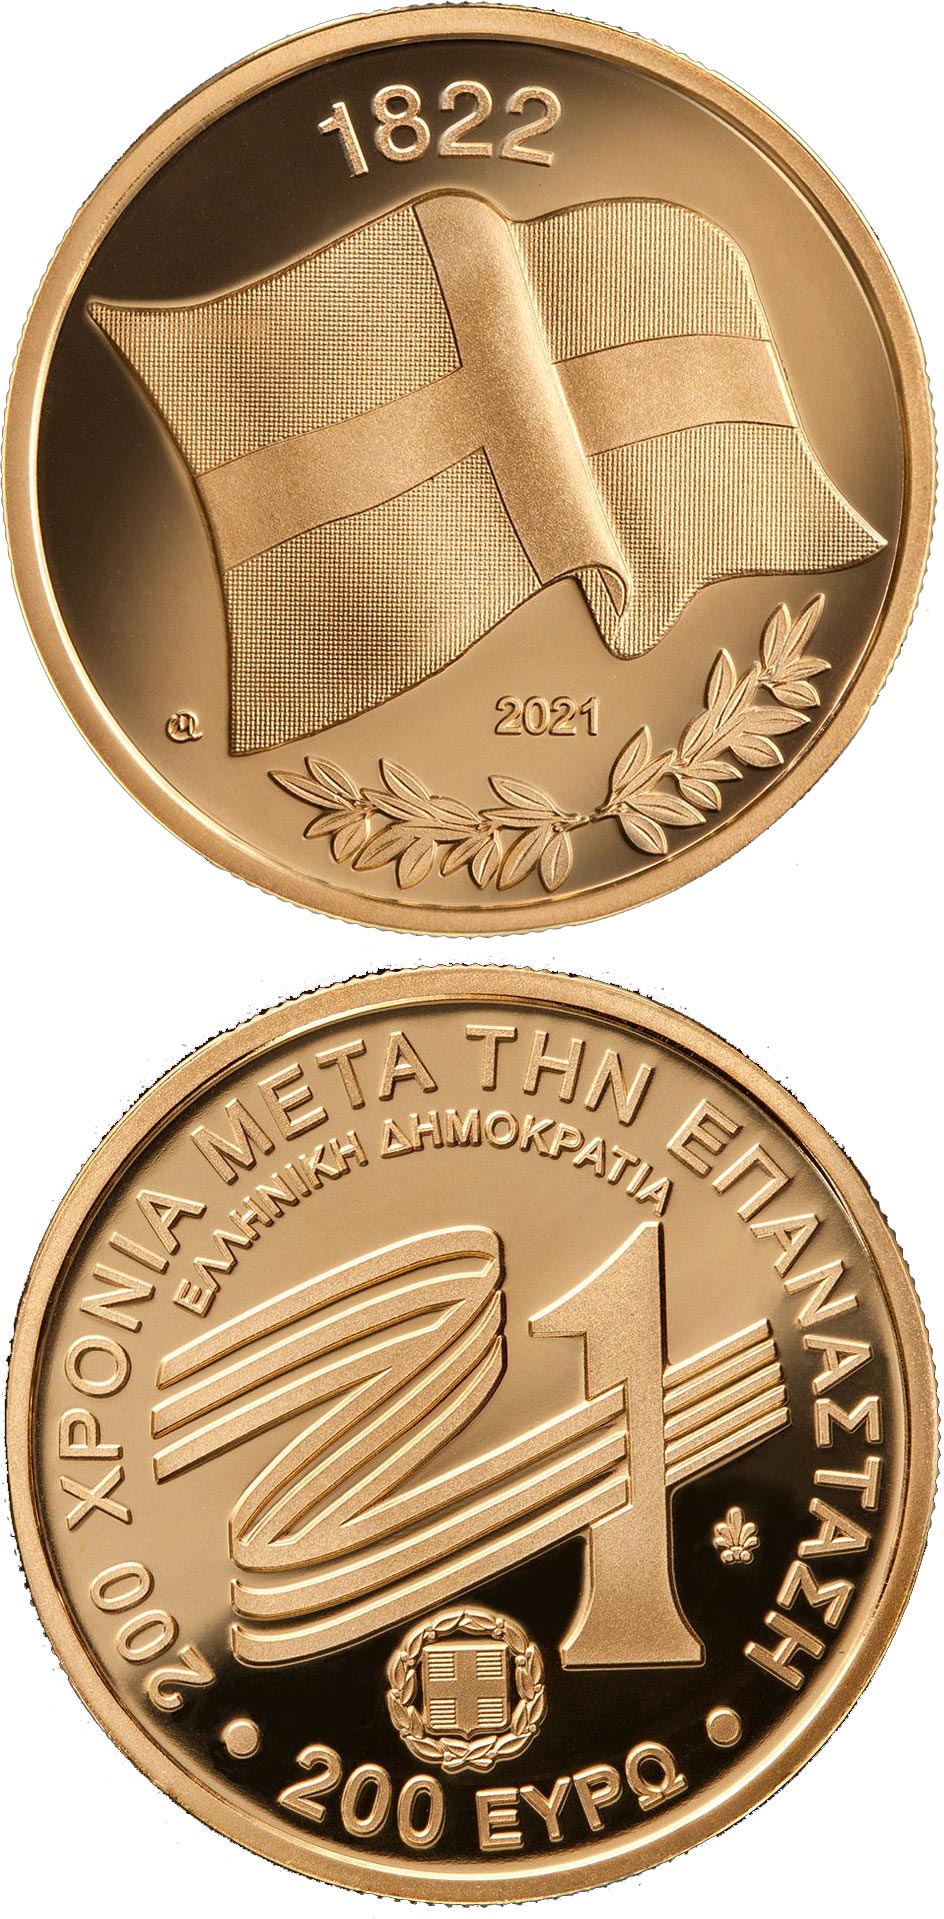 Image of 200 euro coin - The Flags of Greece - Greek Flag of 1822 | Greece 2021.  The Gold coin is of Proof quality.